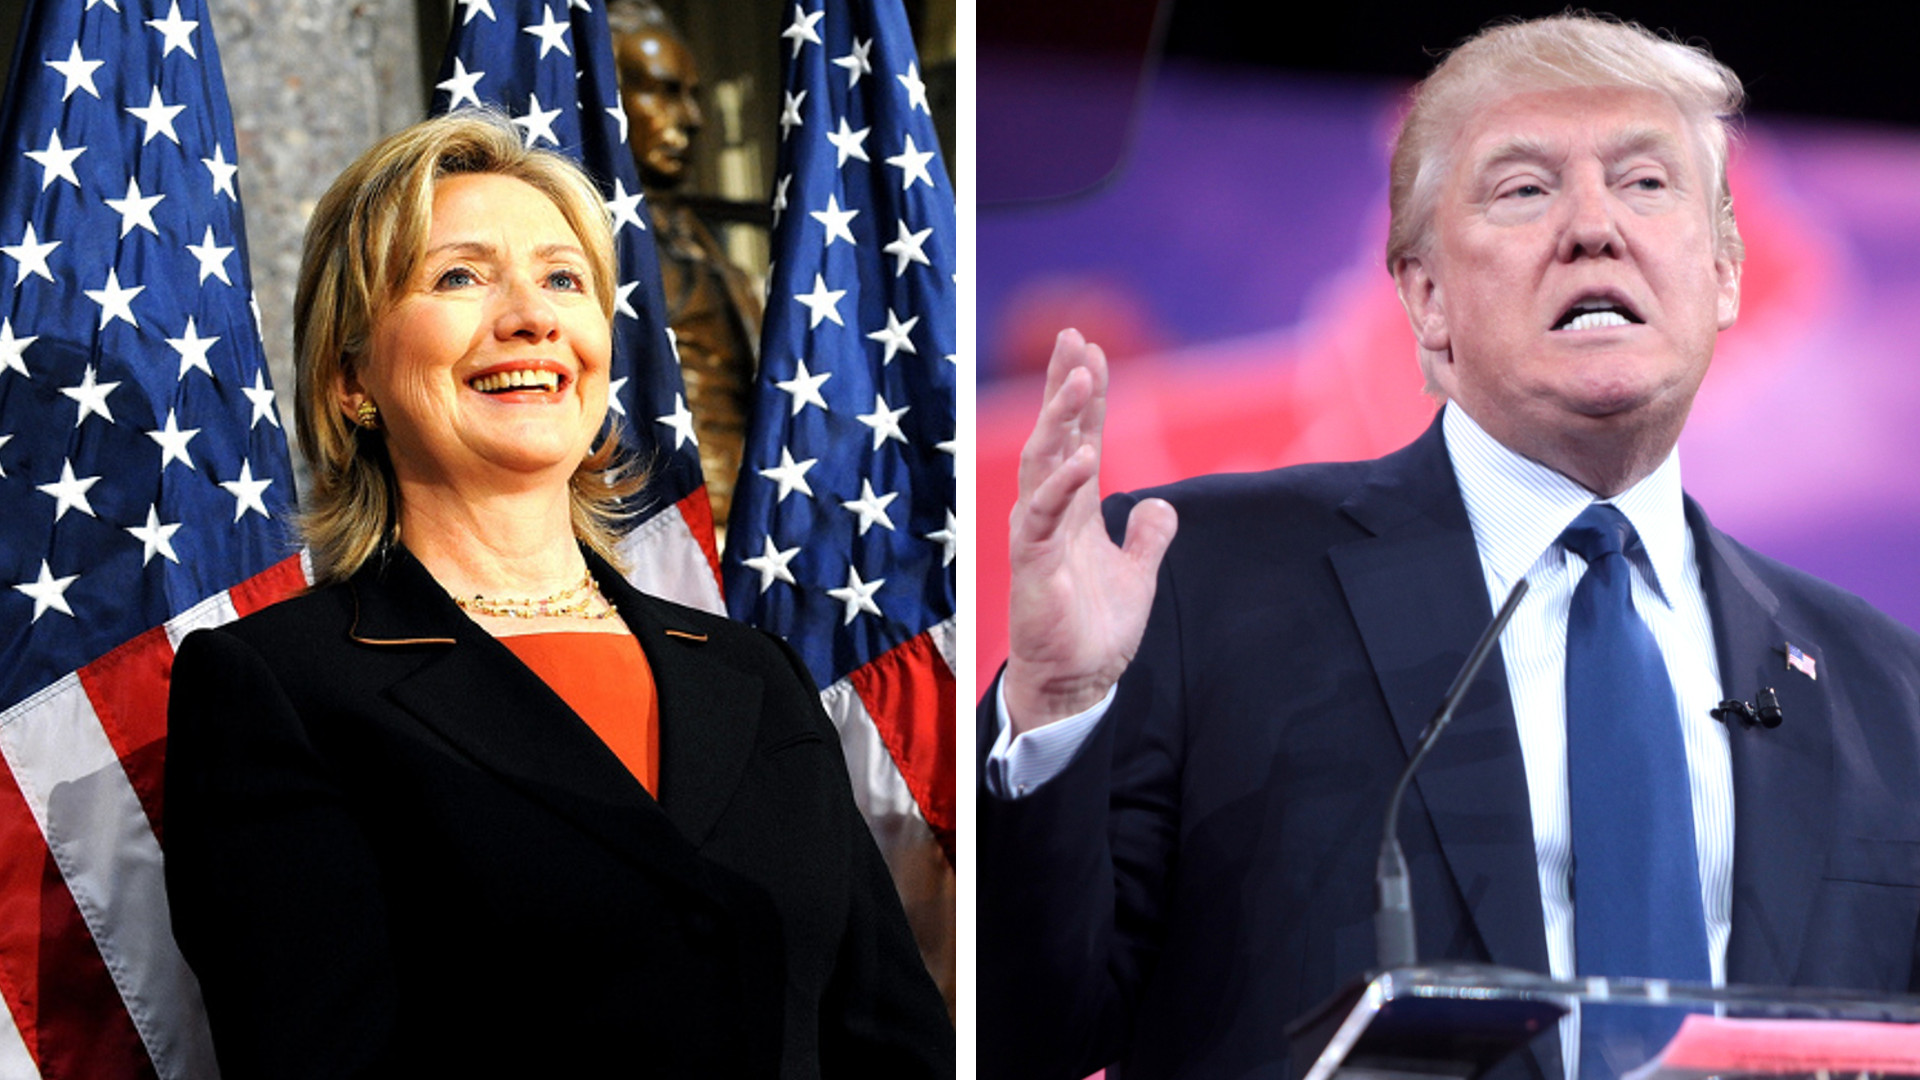 The third presidential debate: The strongman obscures the issues